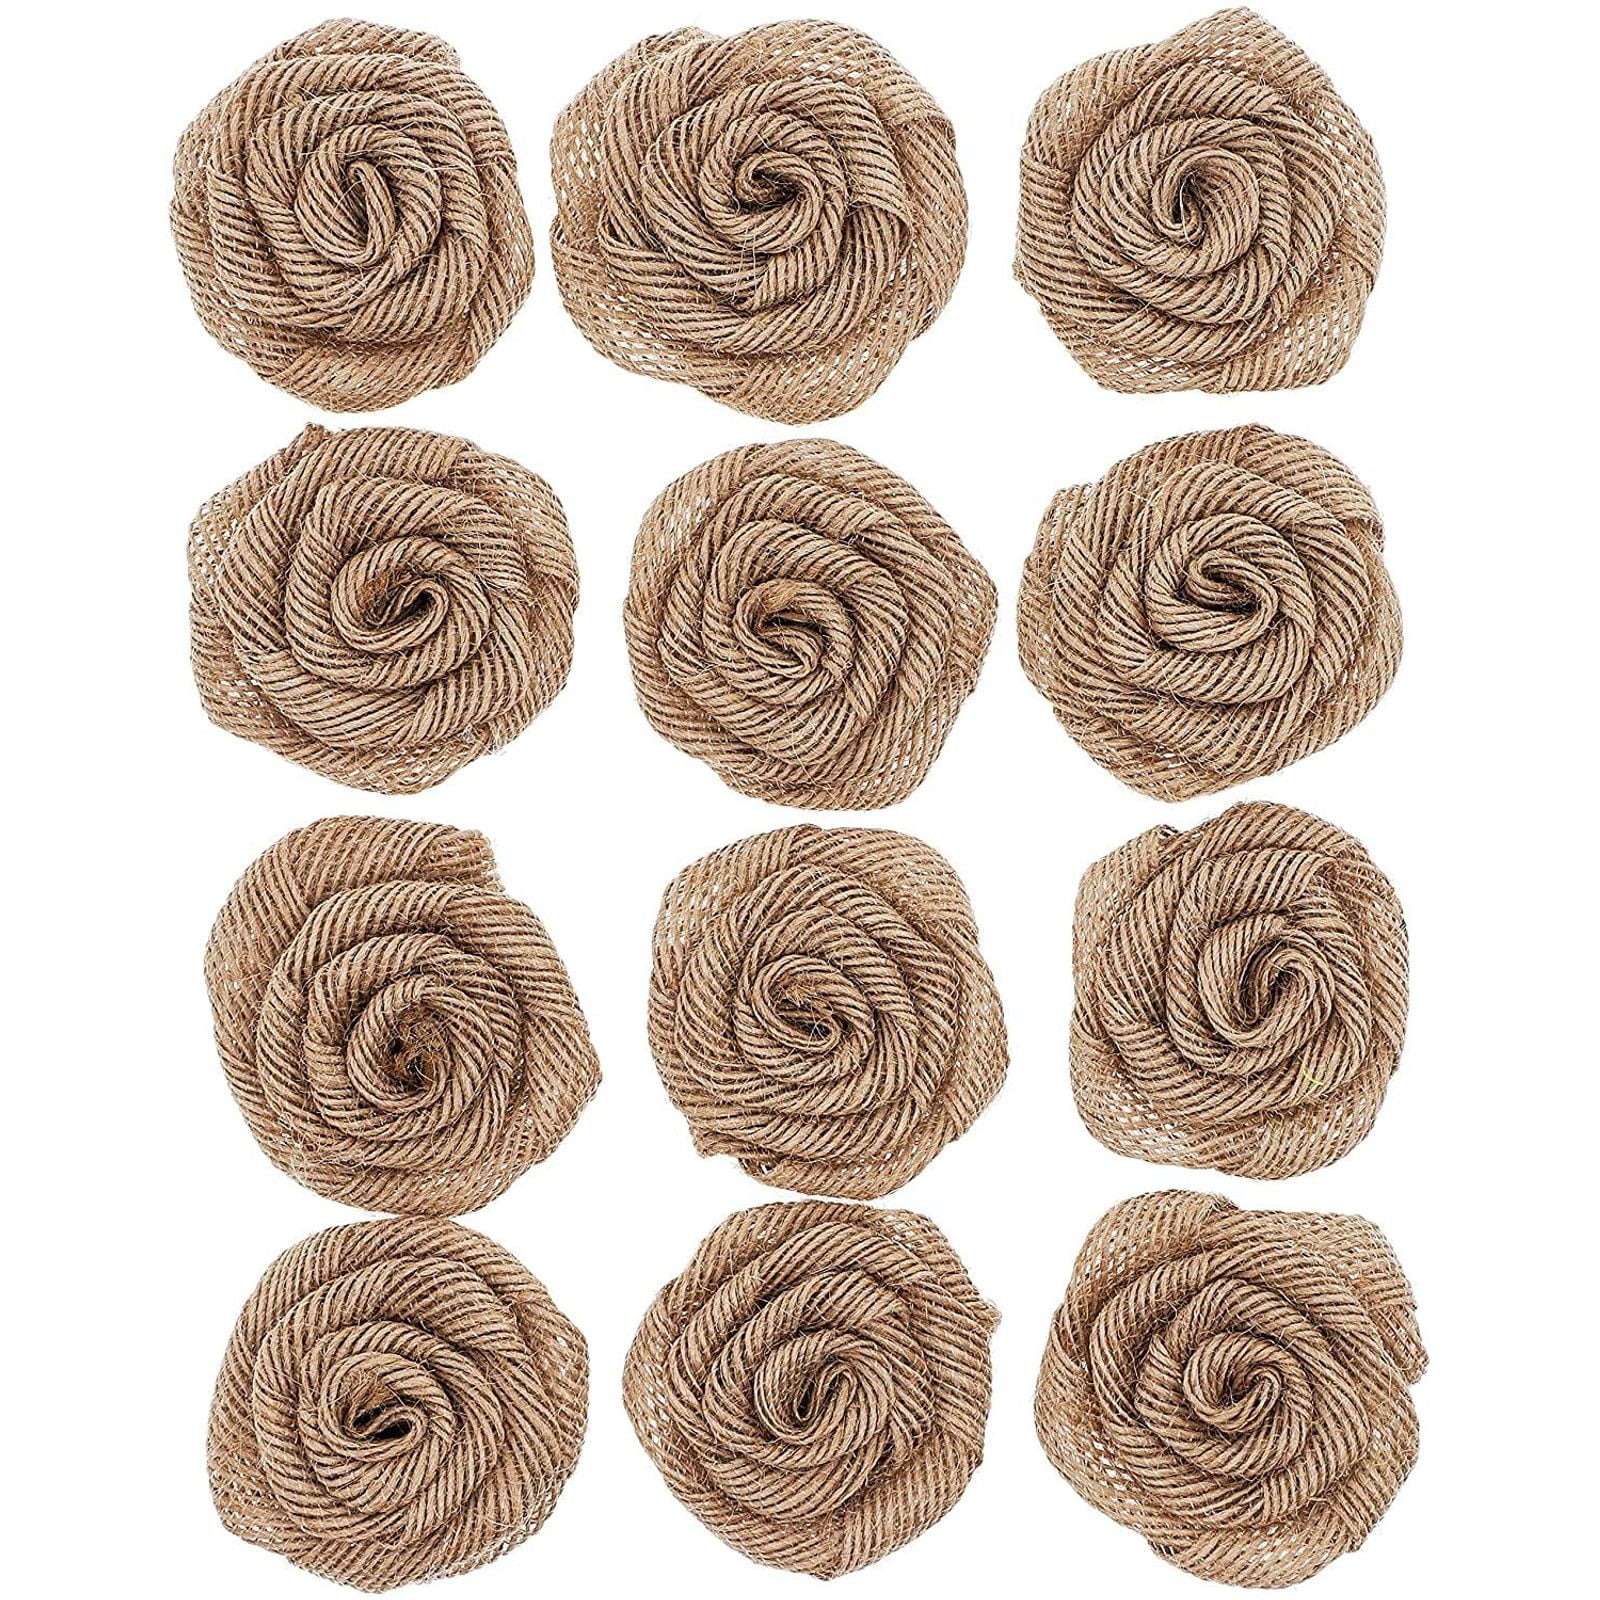 12-Pack Burlap 3-Inch Flower Heads for DIY Crafts and Rustic Wedding Decor 